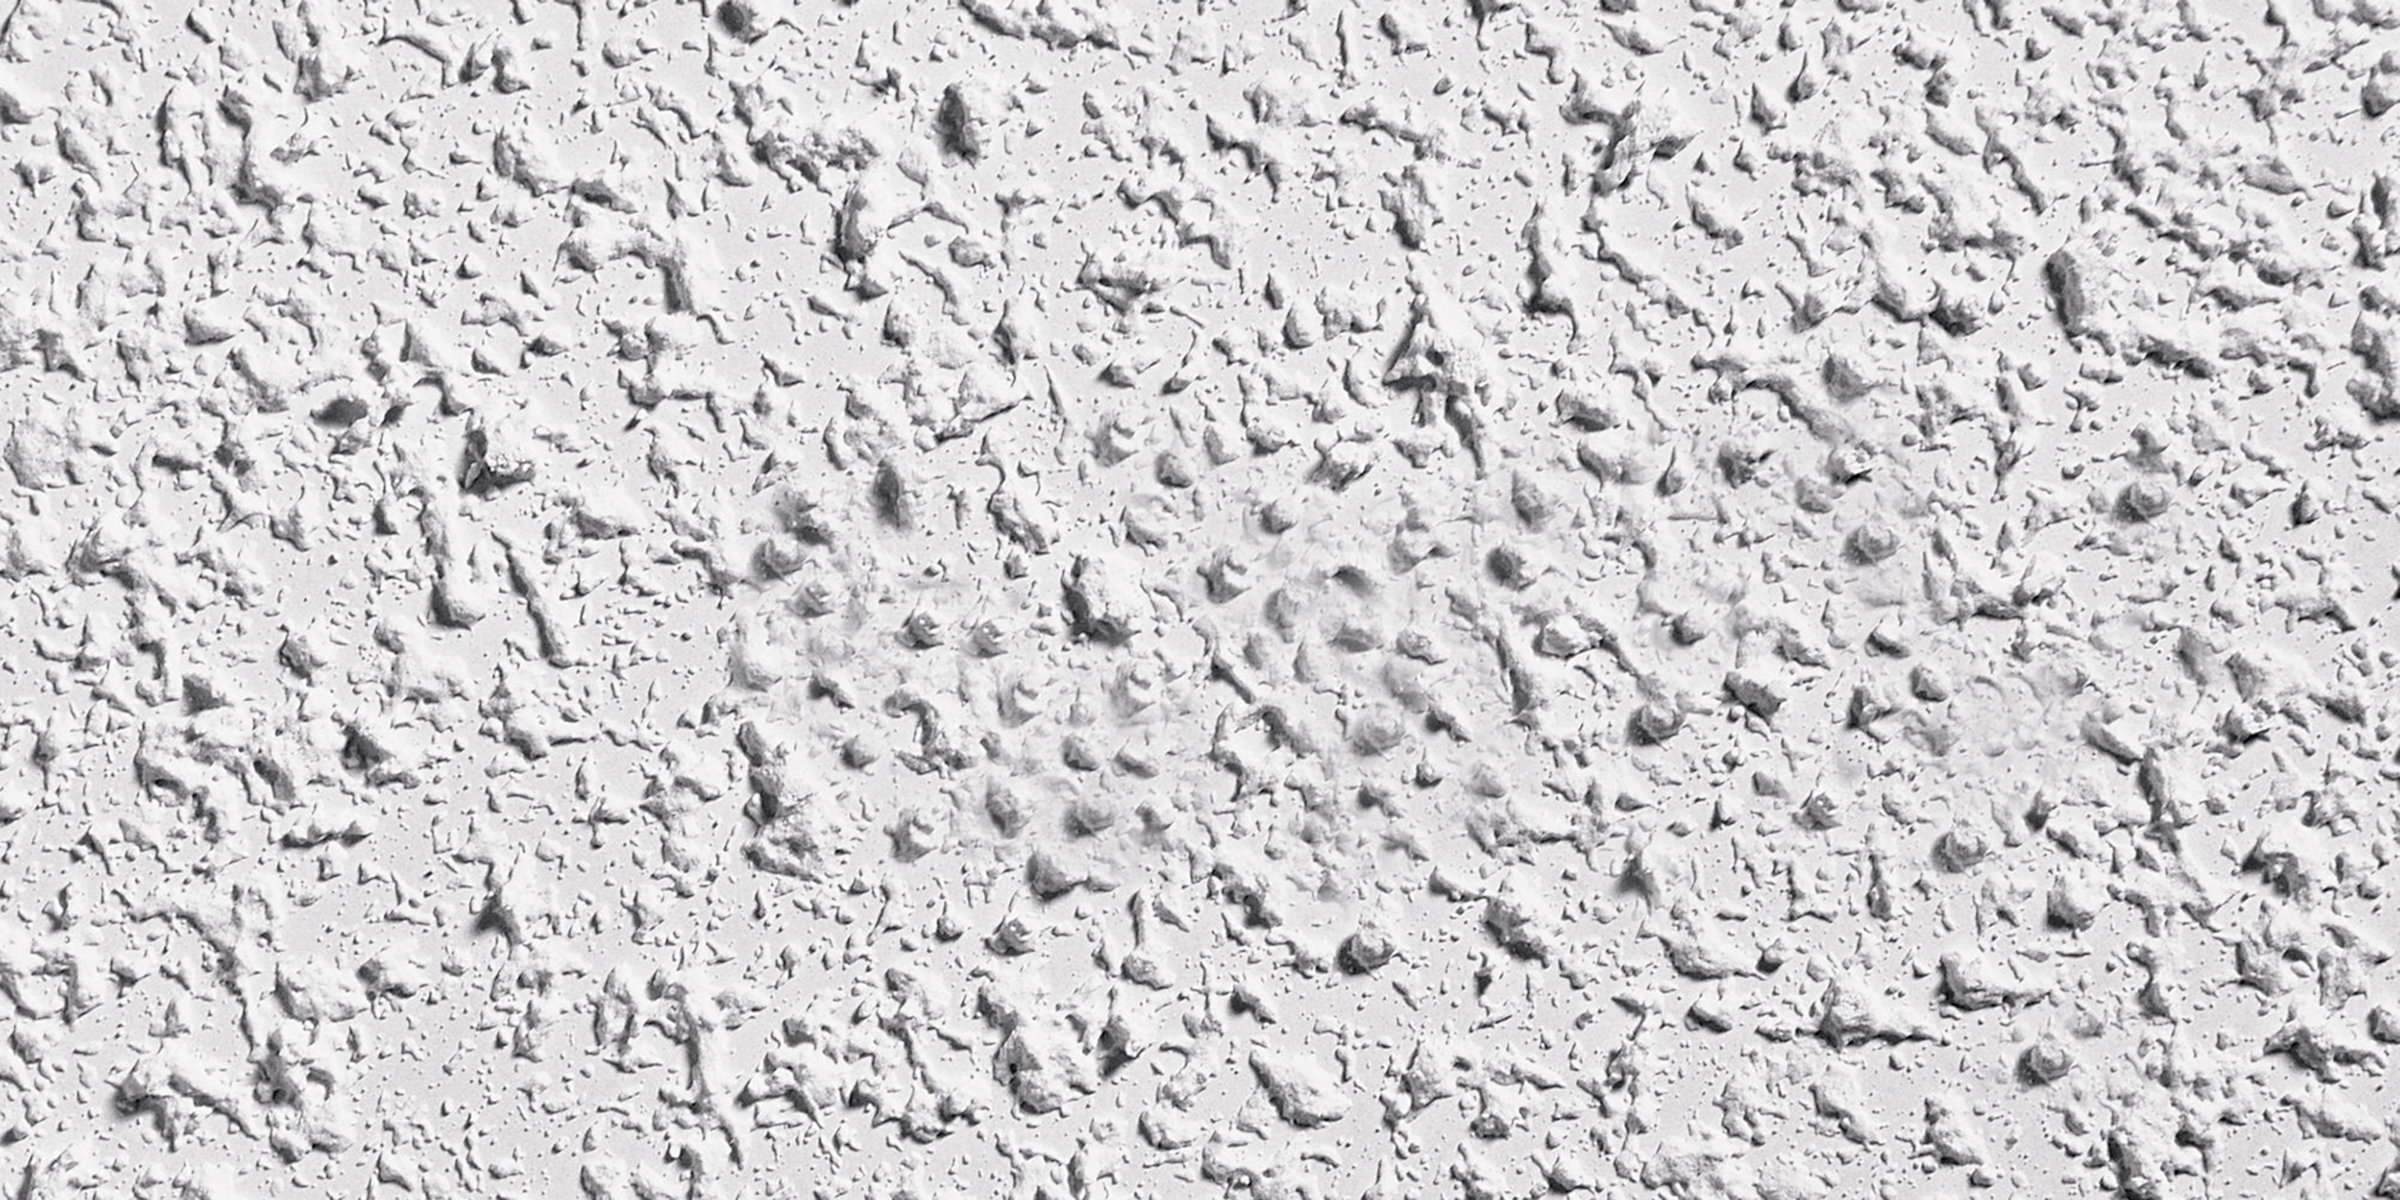 Popcorn Ceilings: What They Are, How to Get Rid of Them